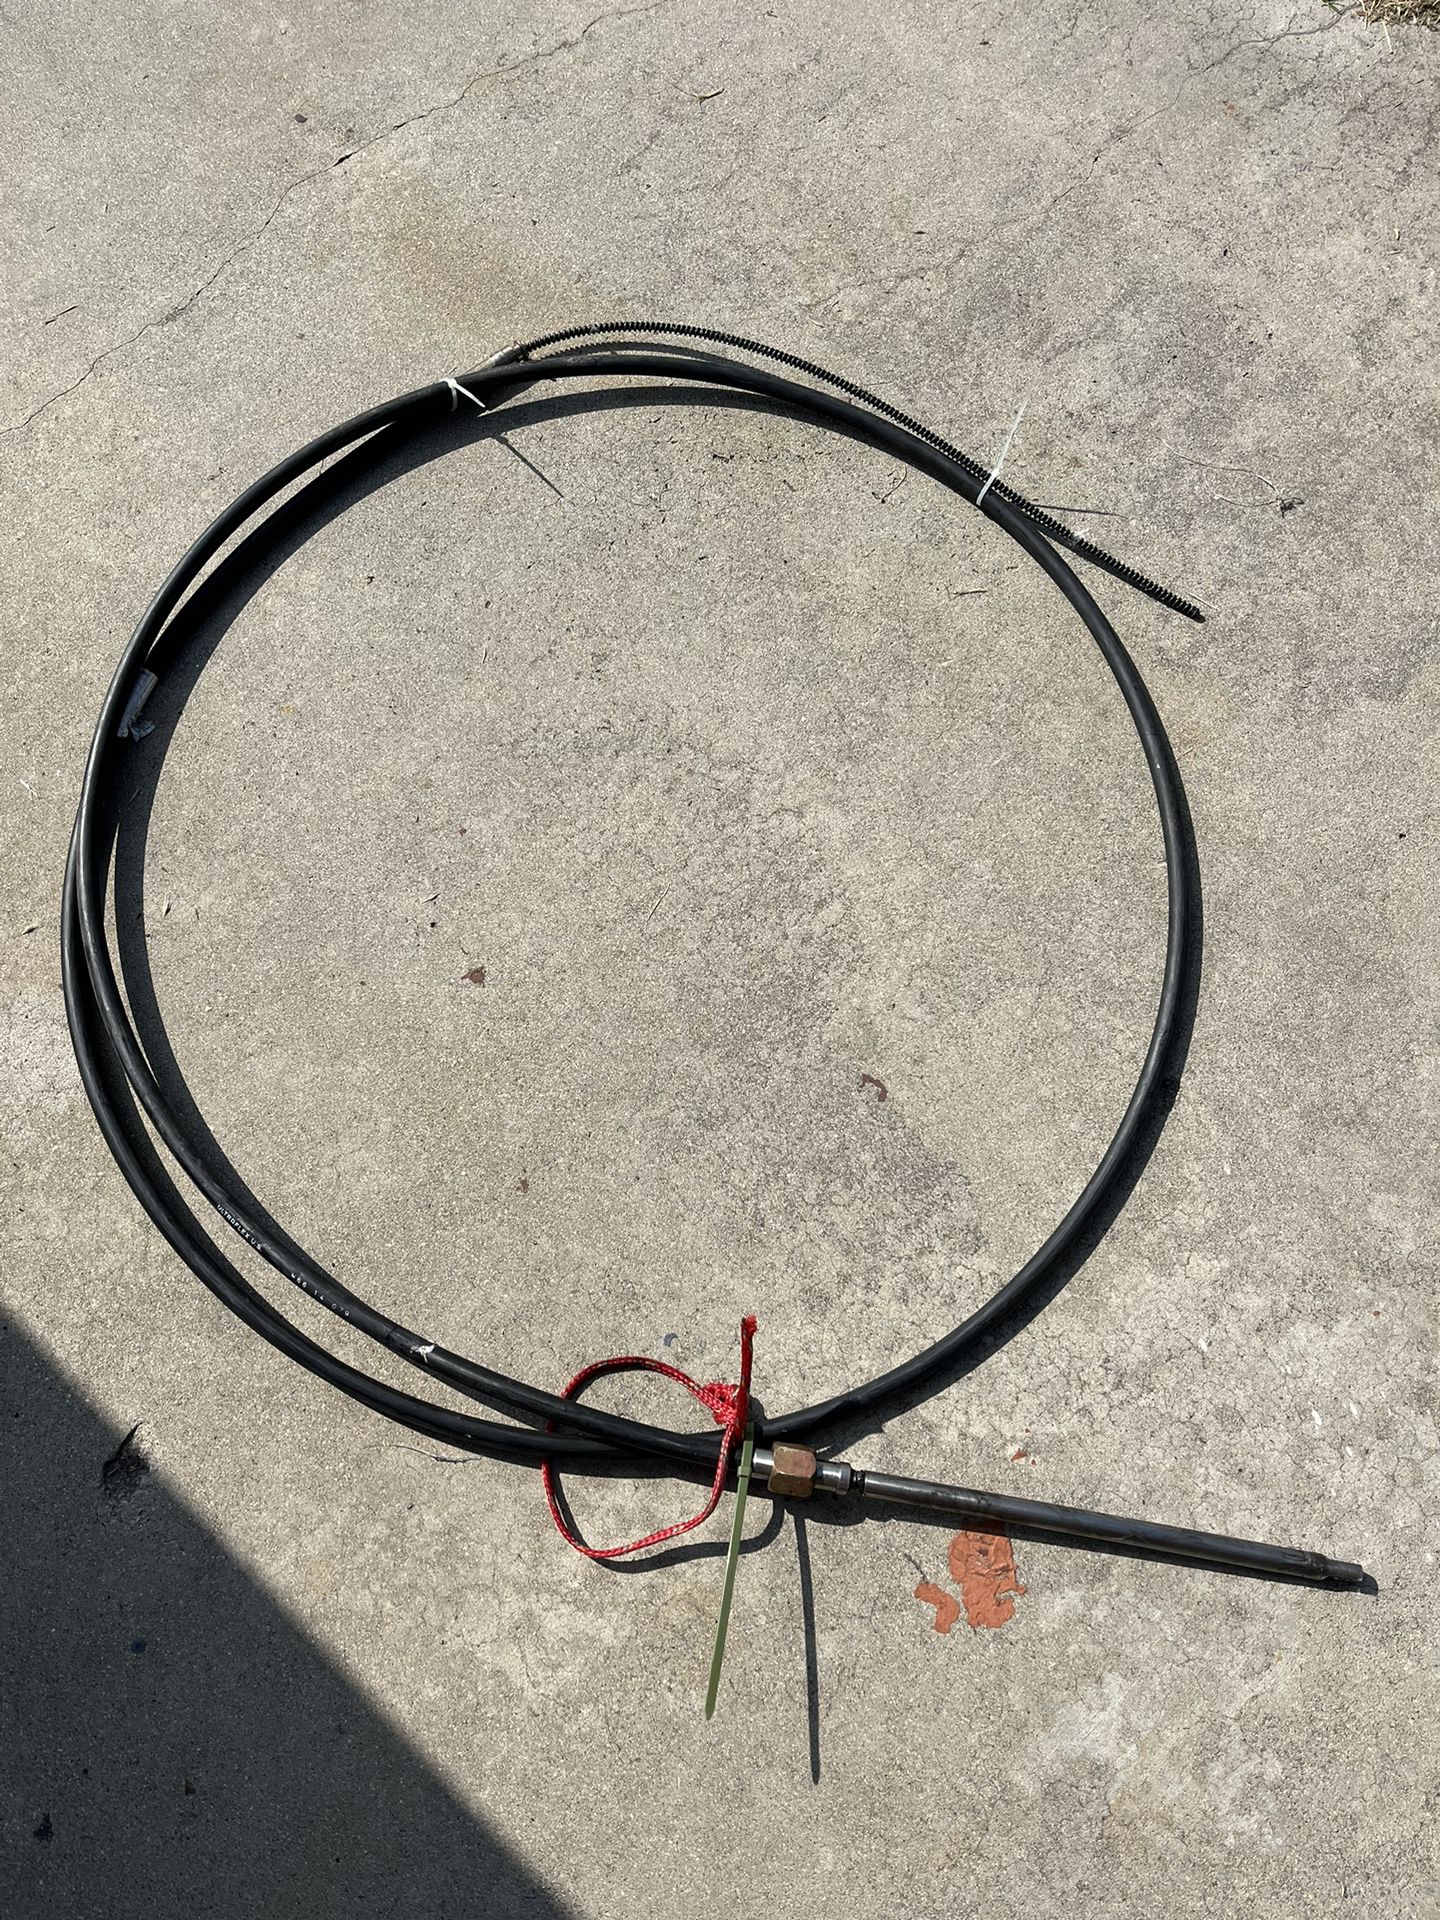 Uflex Steering Cable 14 FT Rotary Quick Connect